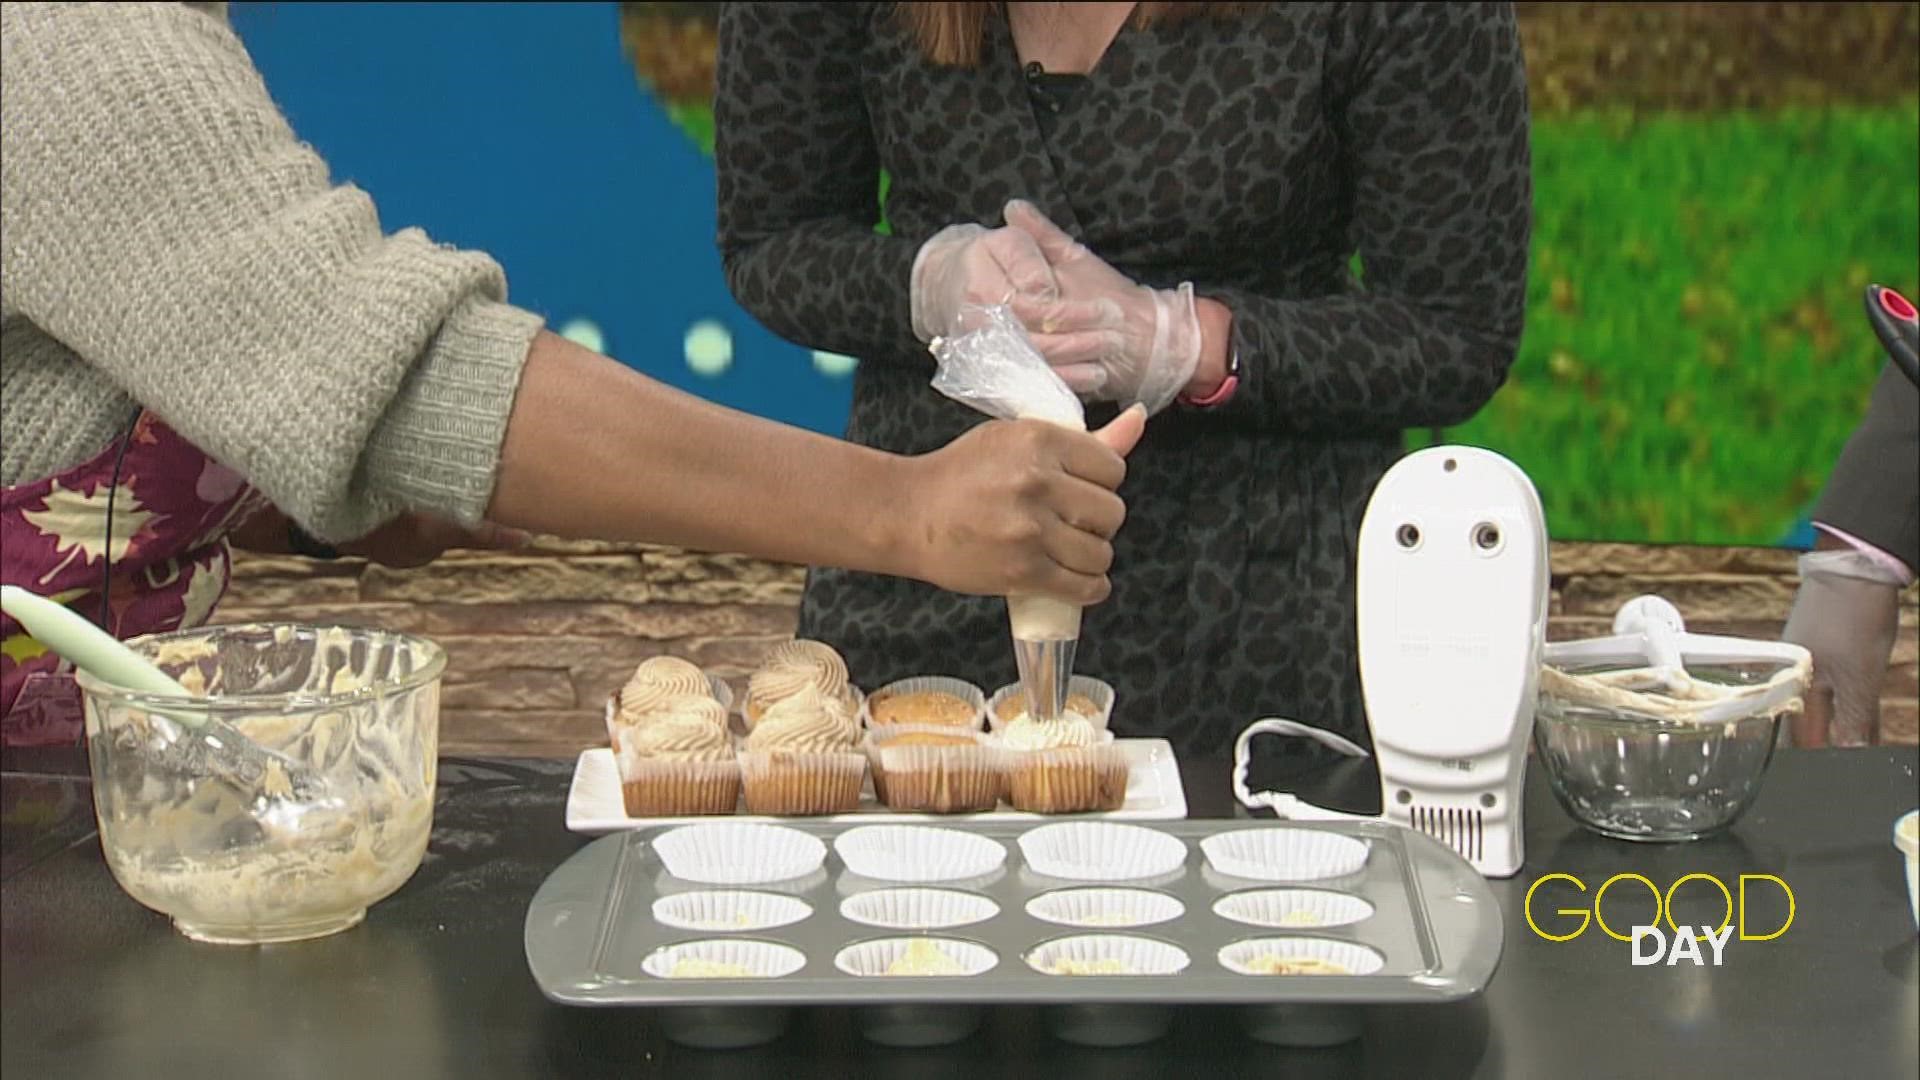 Steven is given some pumpkin spice reprieve in the form of apple cider cupcakes. Brianna Stewart from Jera's Heavenly Sweets joins the Good Day crew with the recipe.